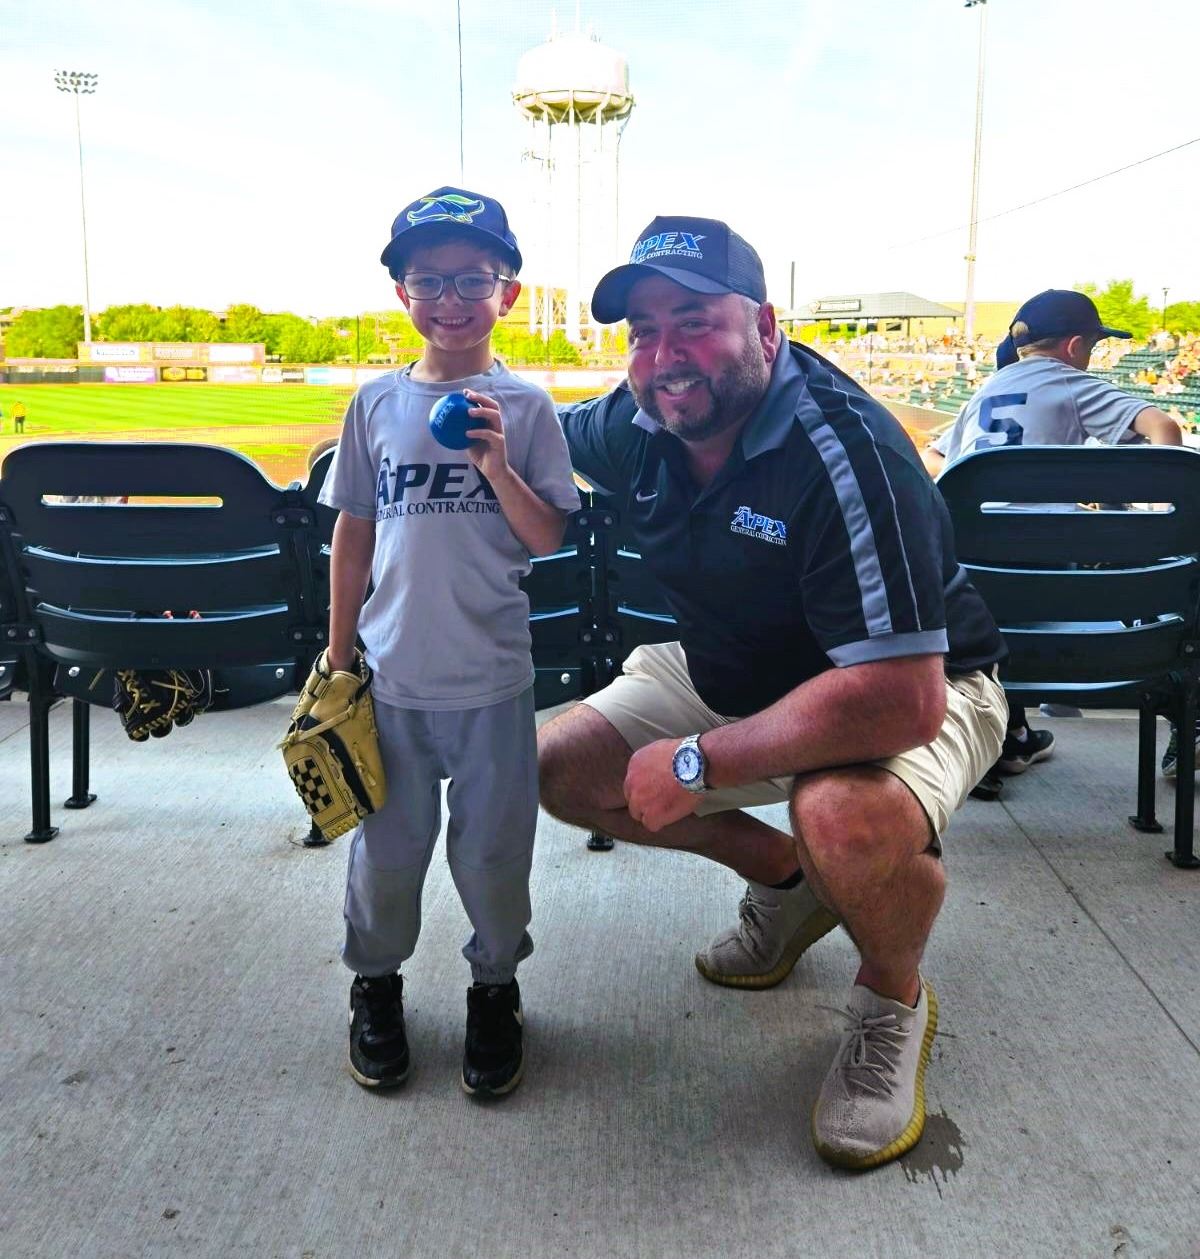 Father & Son At a Baseball Game 